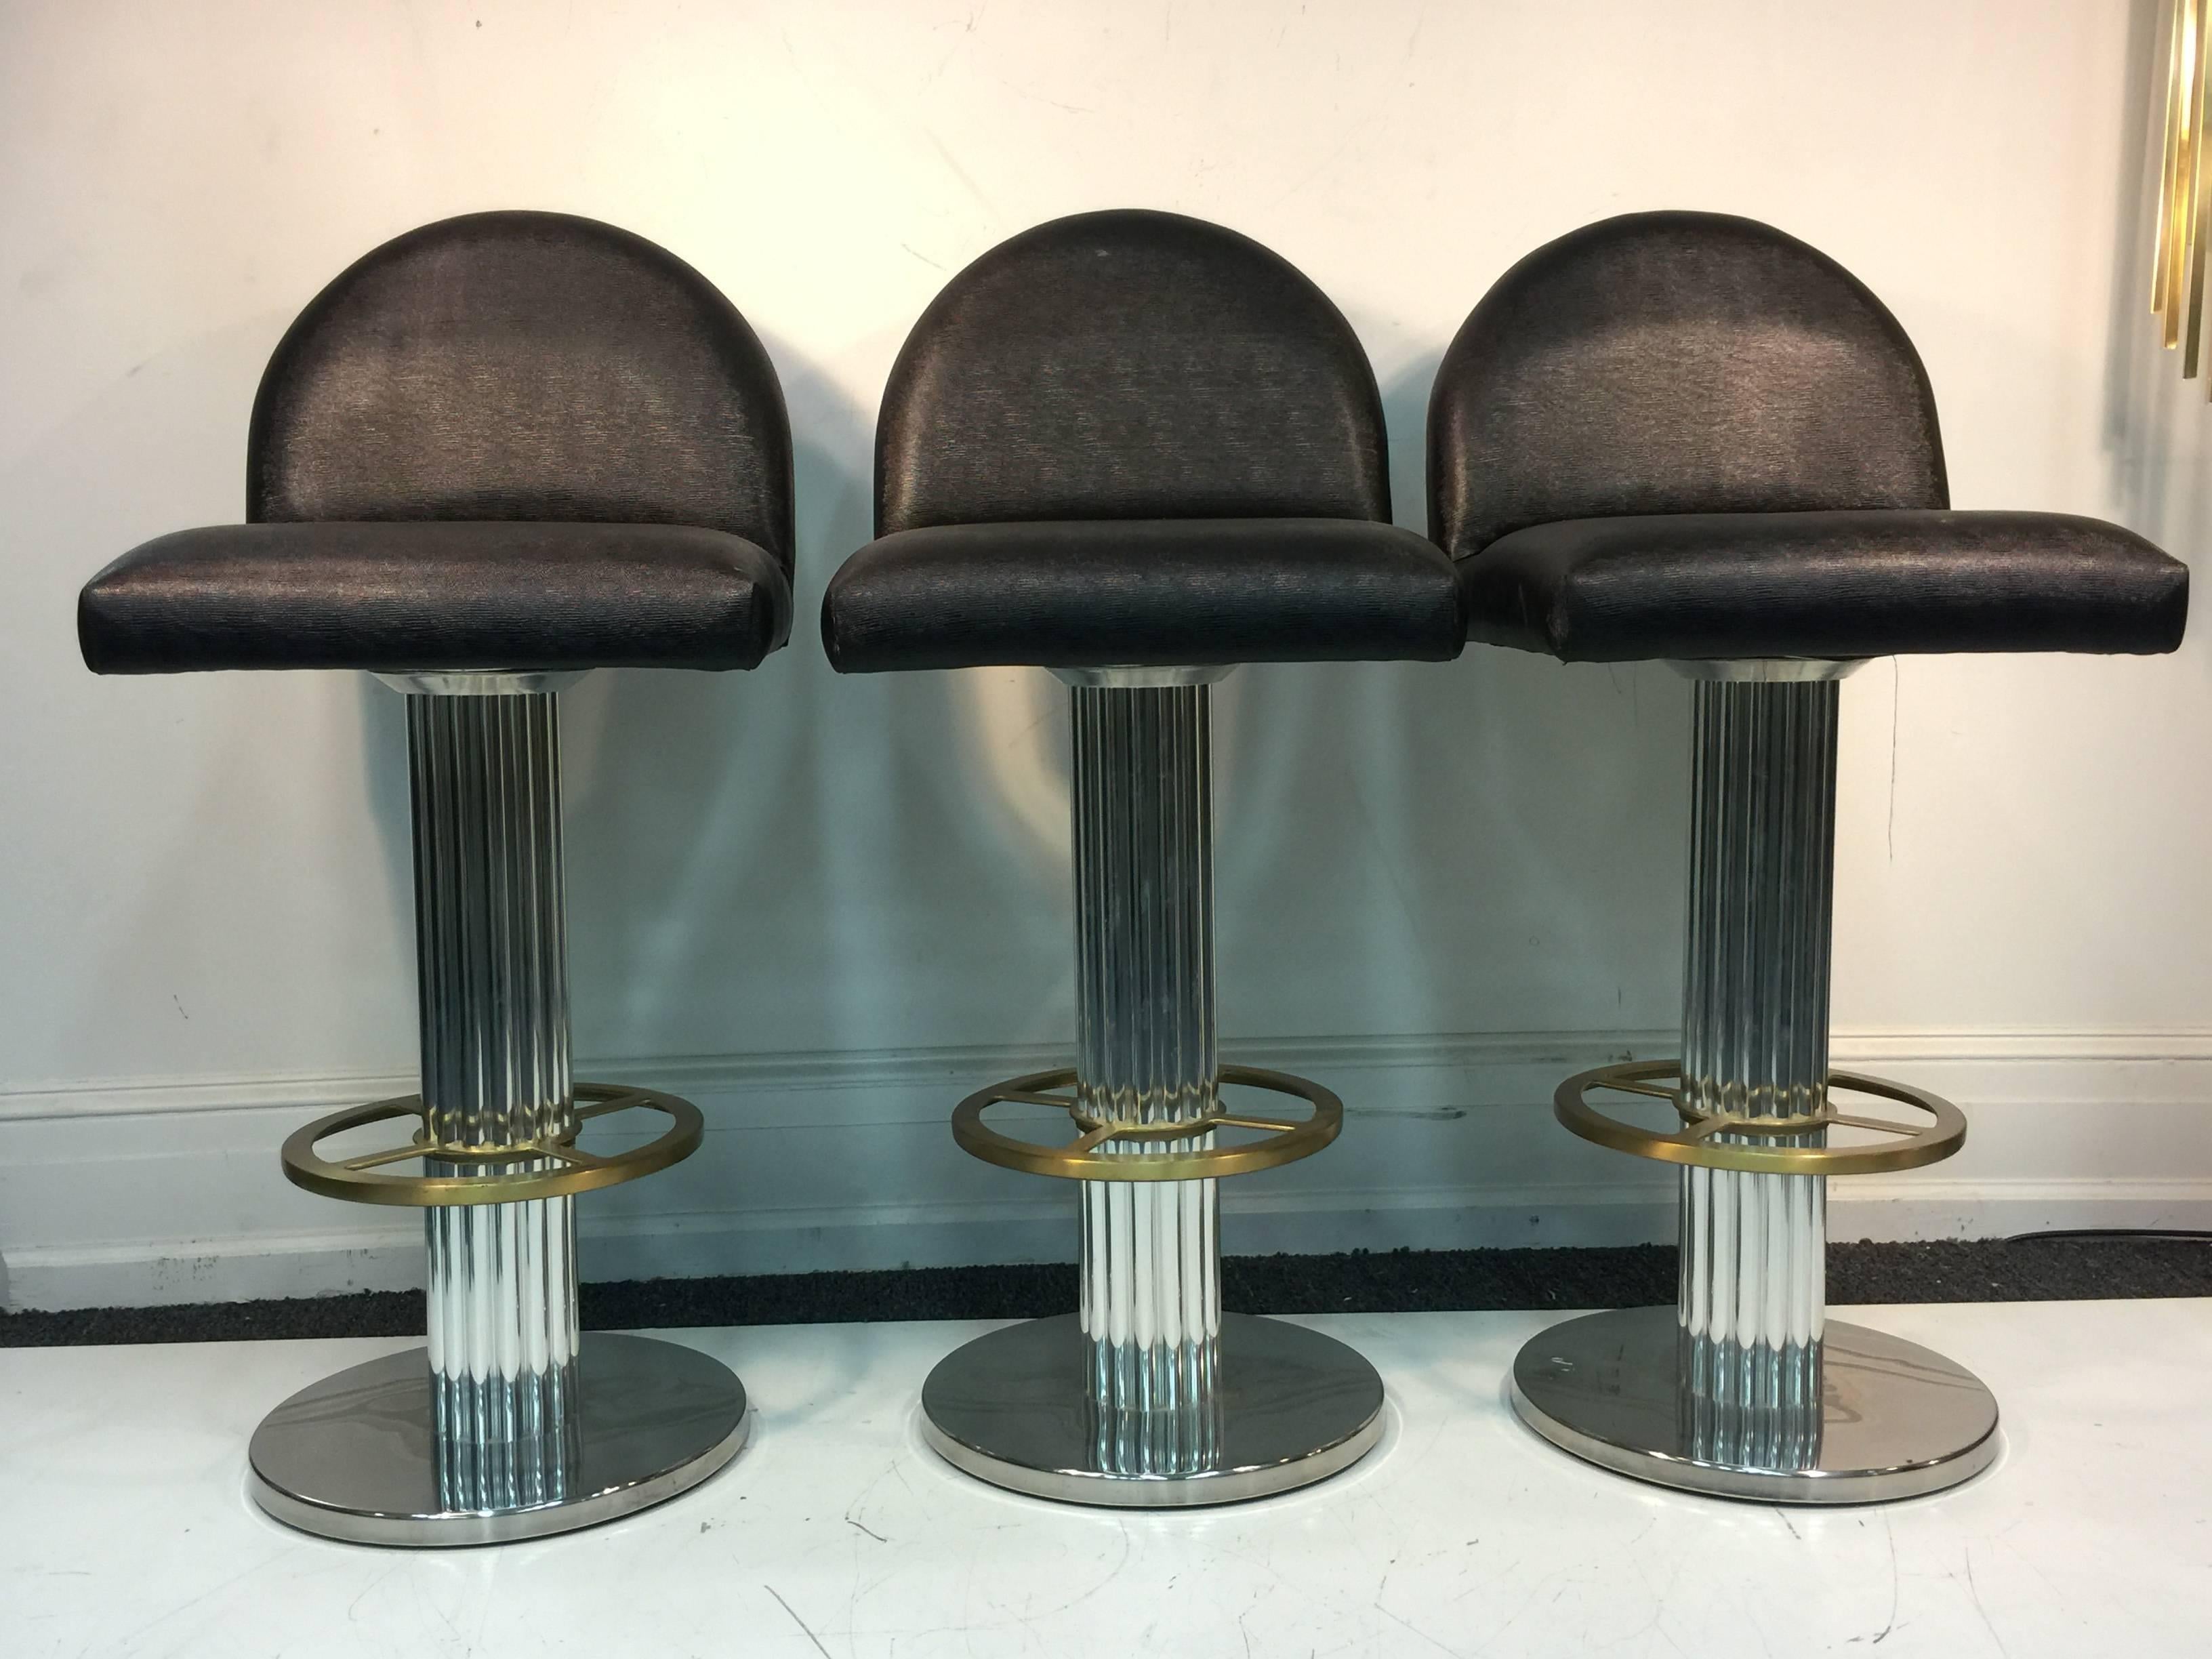 A fabulous set of three chrome and brass bar stools with rich faux lizard upholstery. Original label underneath. Manufactured in 1995.